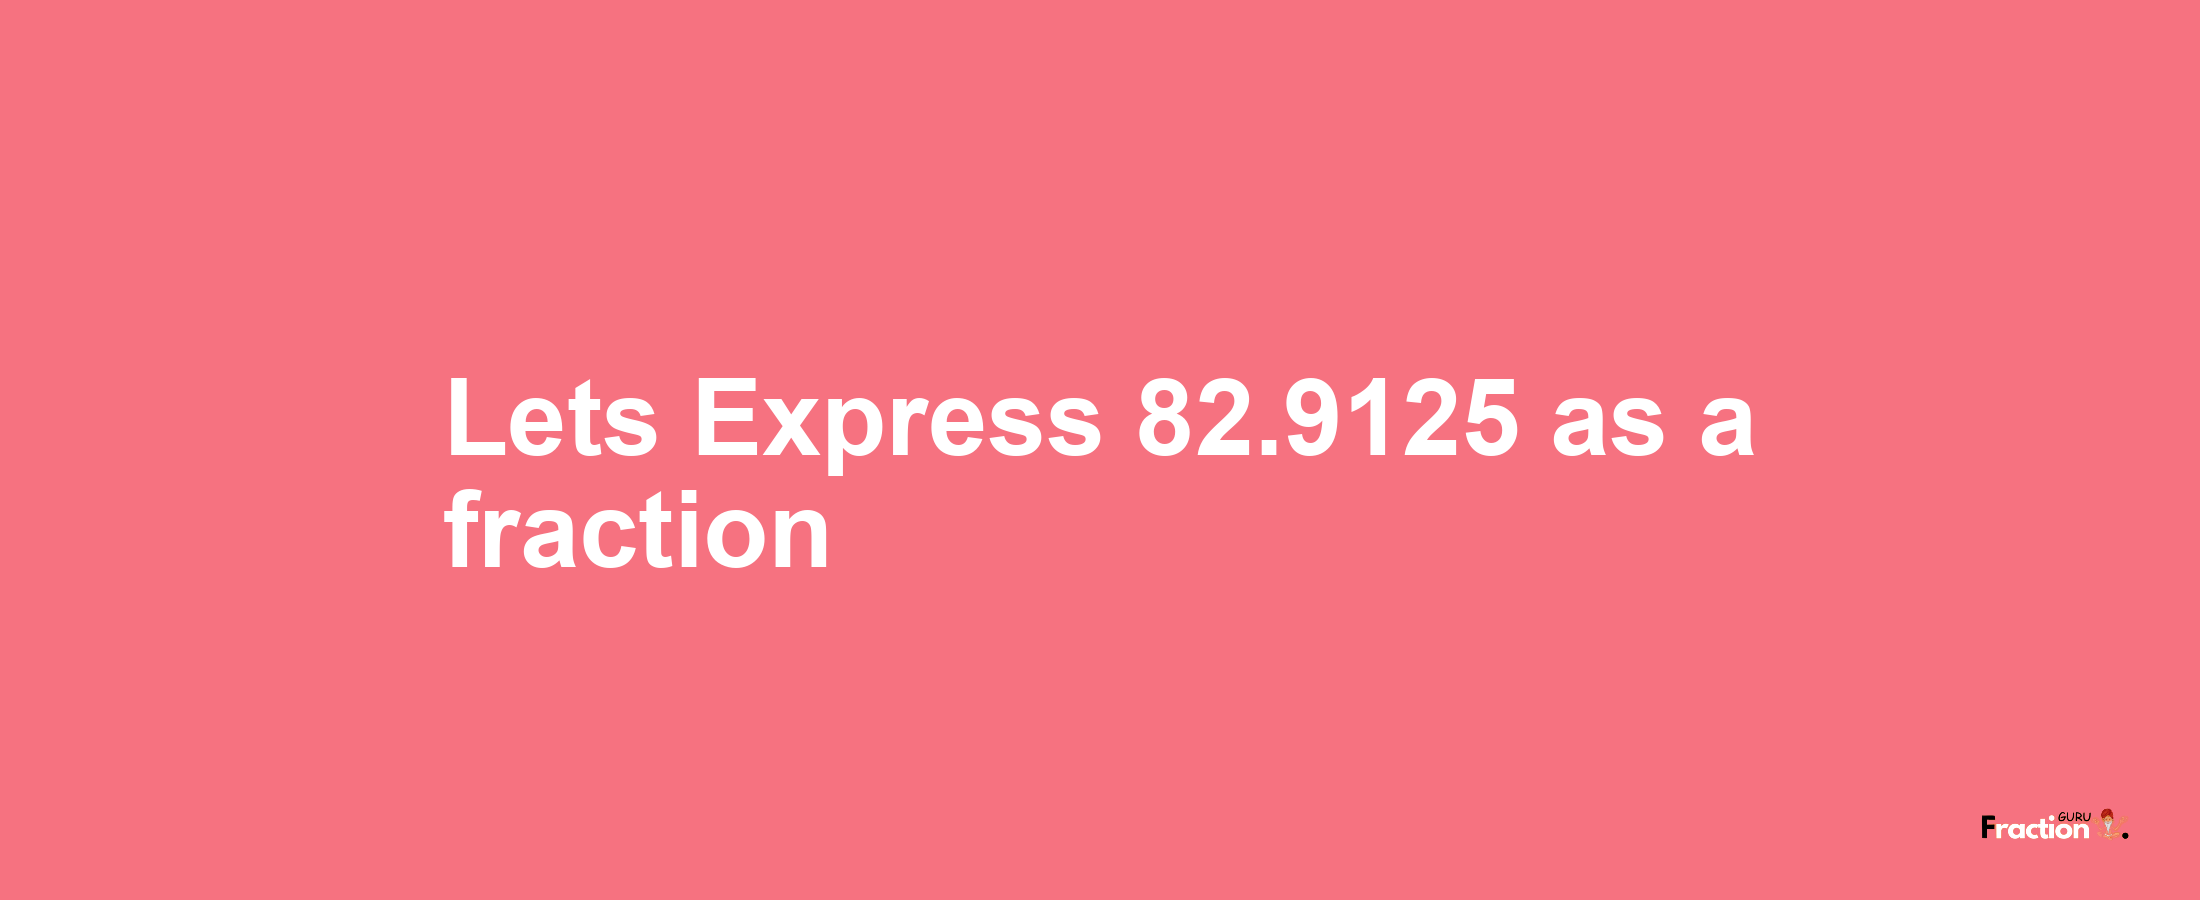 Lets Express 82.9125 as afraction